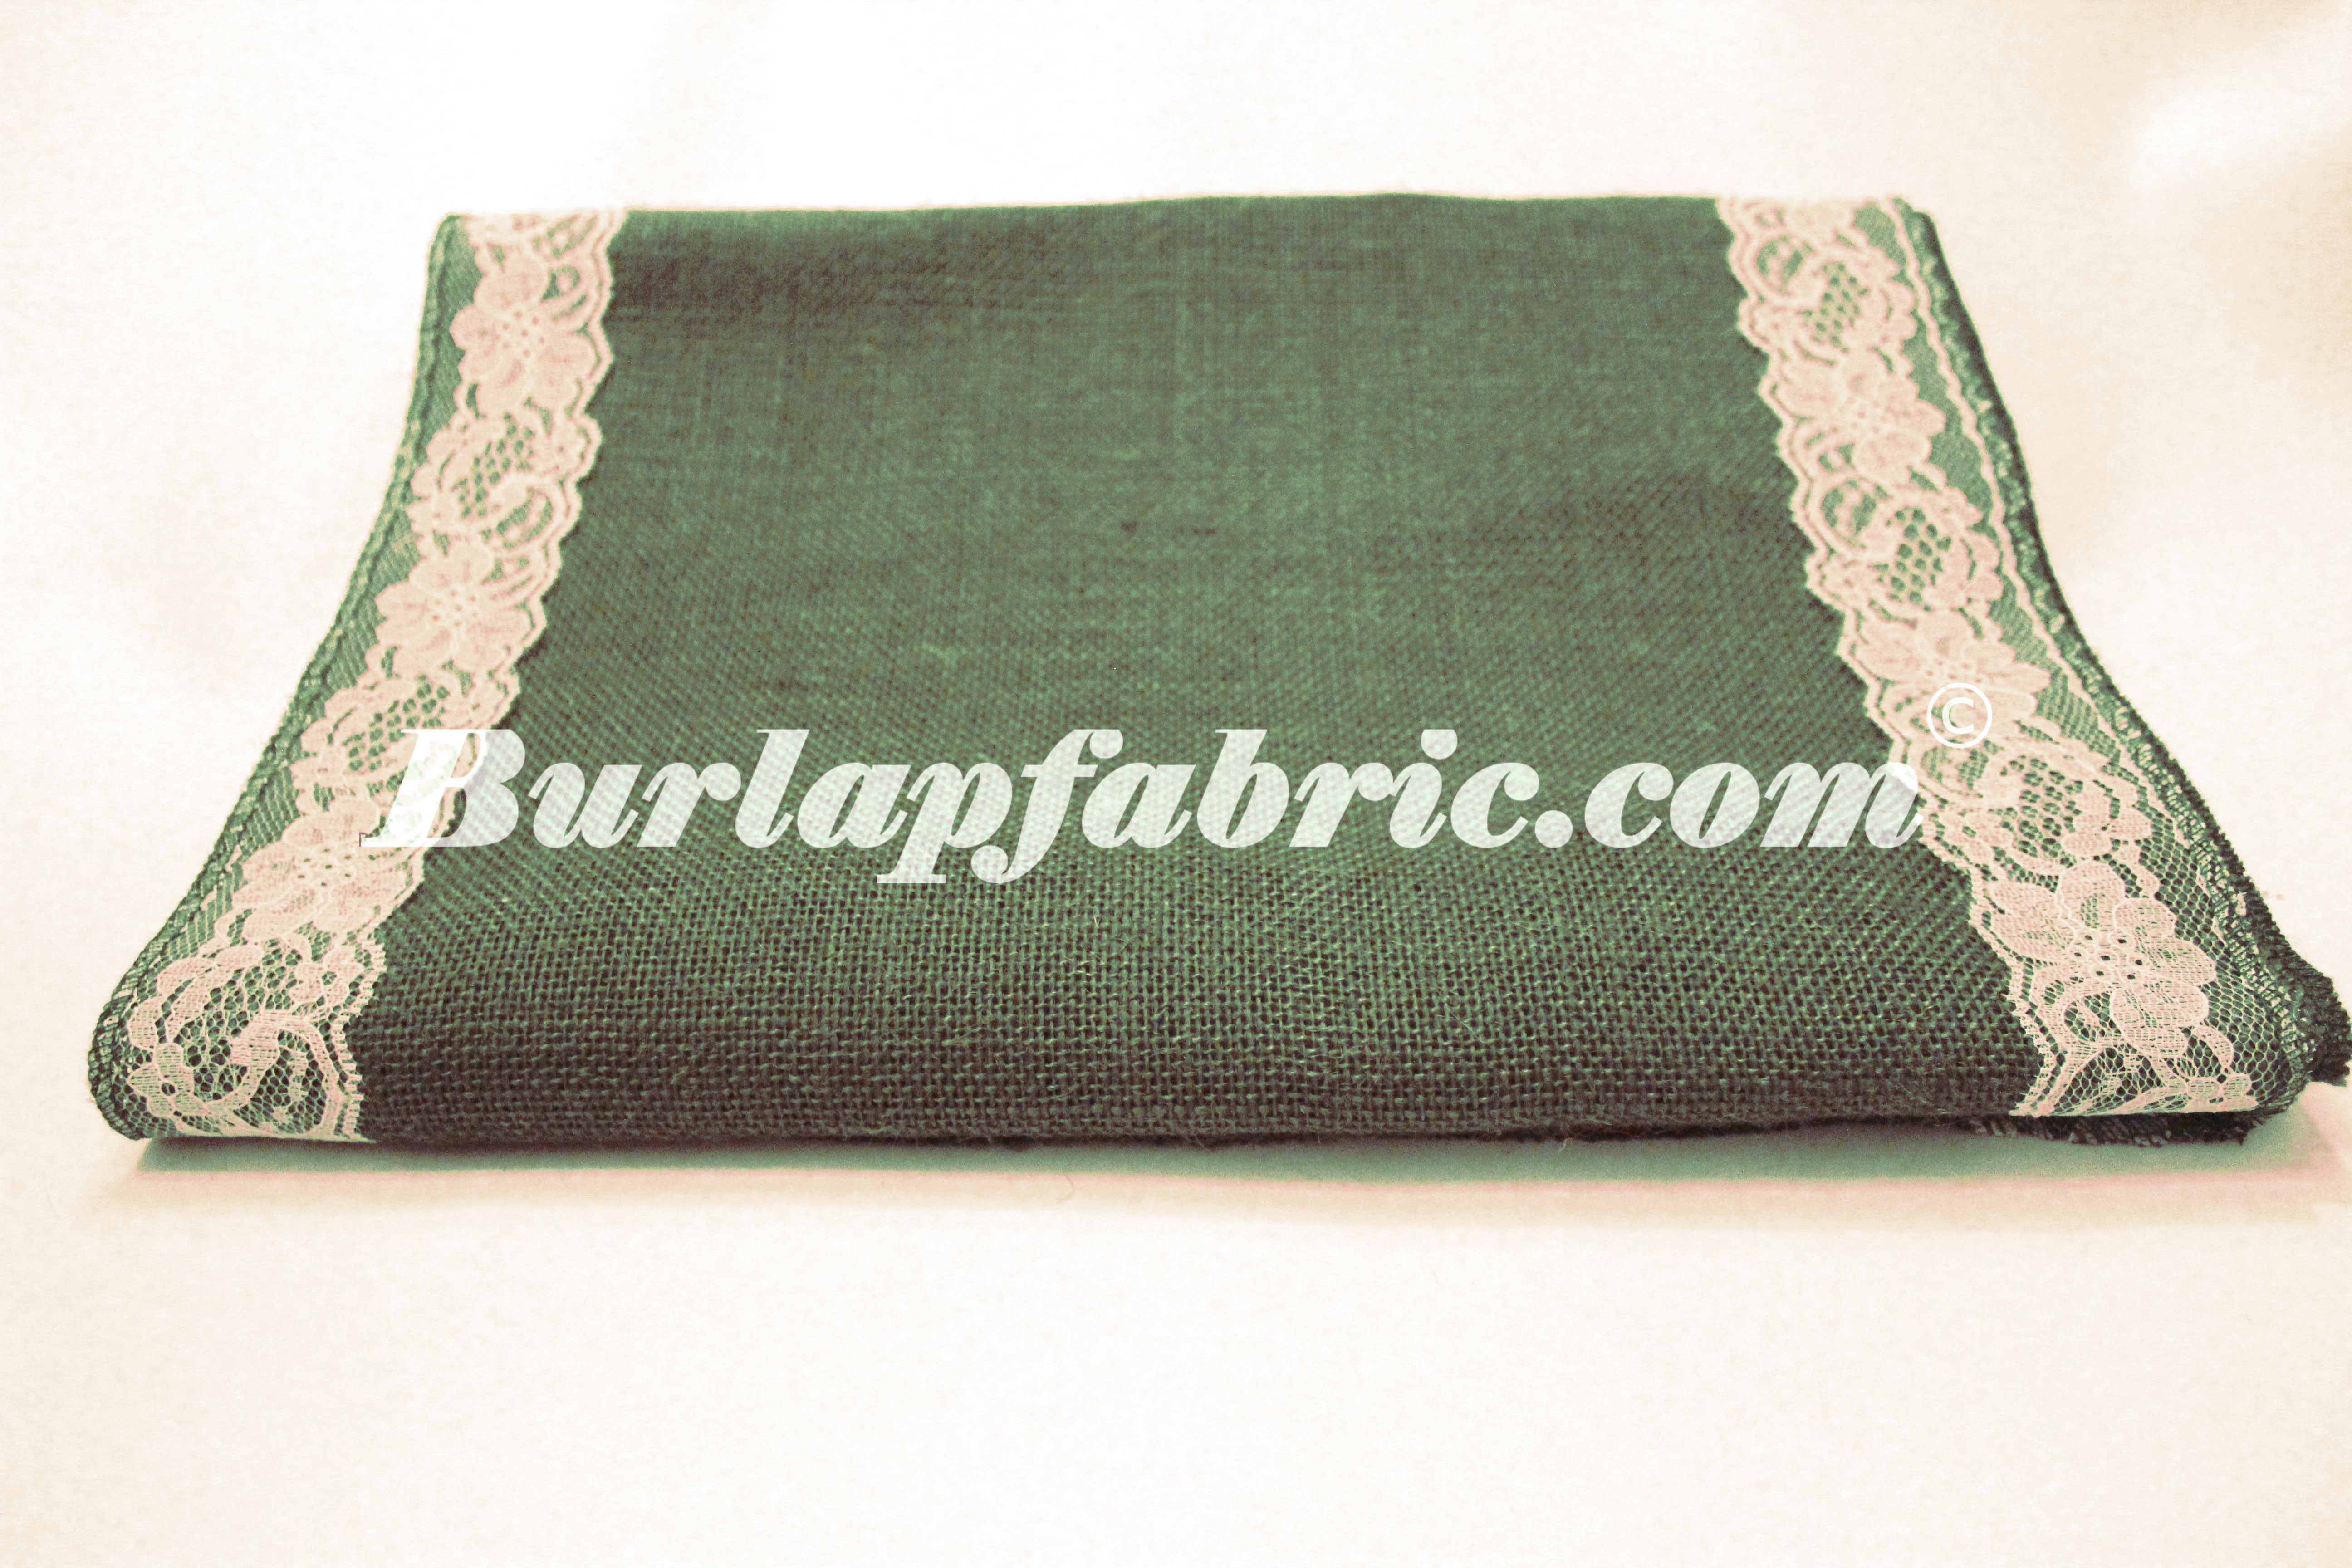 14" Hunter Green Burlap Runner with 2" White Lace Borders